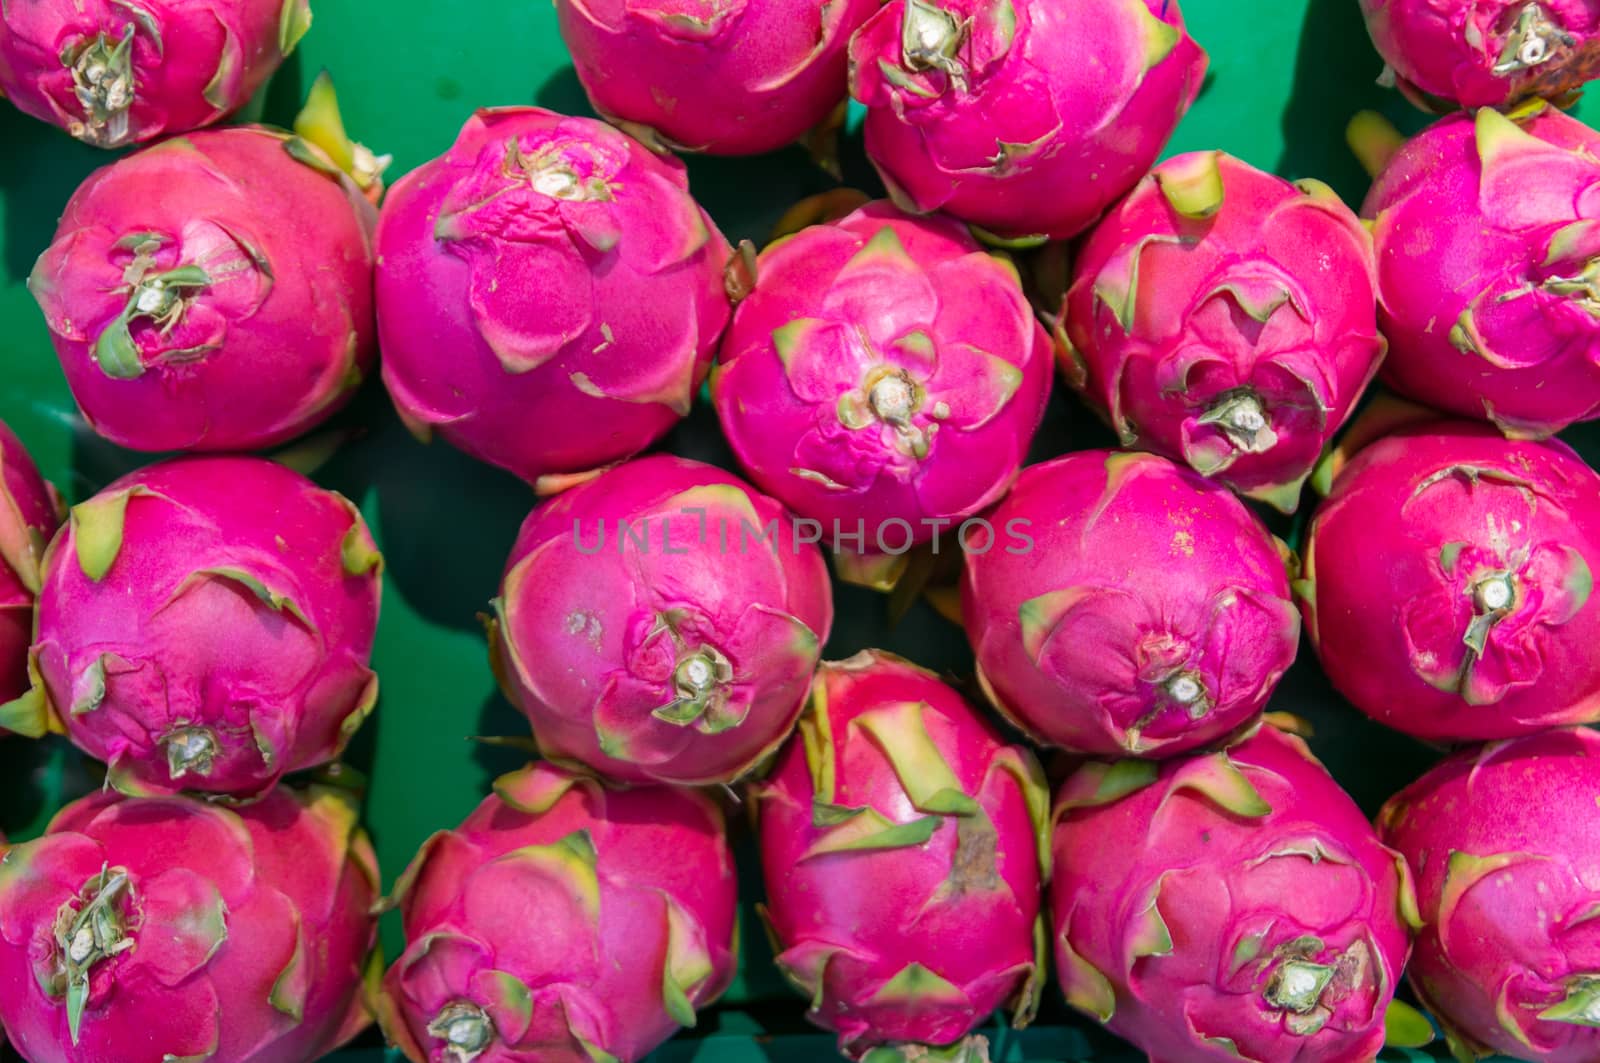 Dragon fruit on market stand, Thailand, for use as Background pattern